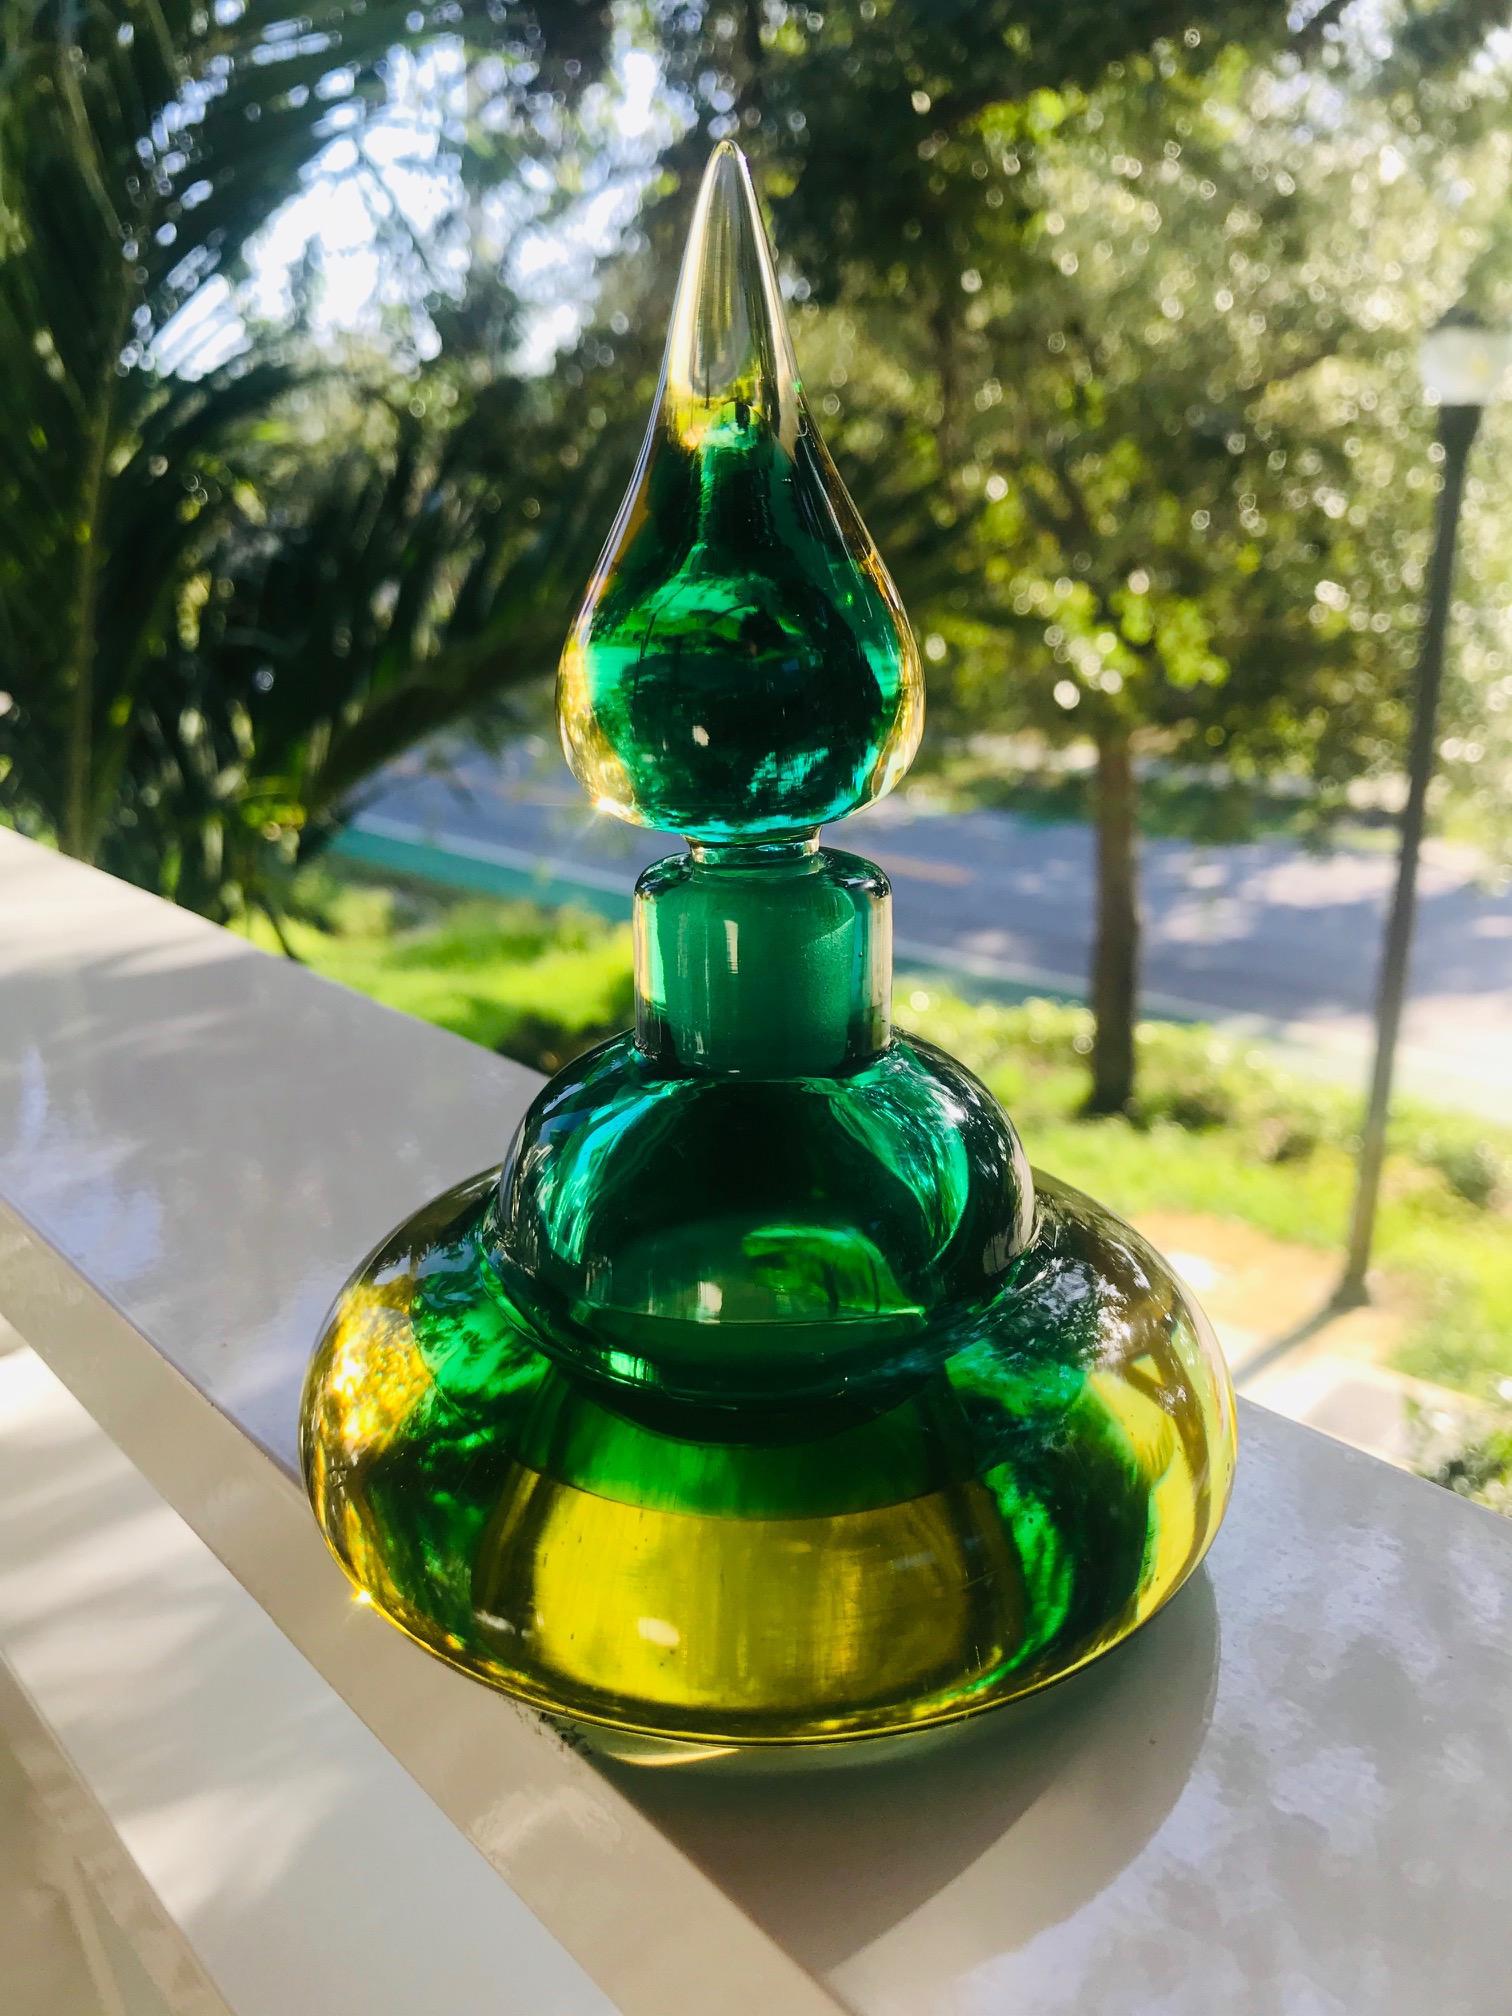 Mid-Century Modern decorative bottle or vintage perfume bottle in vibrant hues of emerald green and golden yellow. Beautifully handcrafted with sommerso technique featuring a stylized genie bottle design with a teardrop glass stopper, reminiscent of